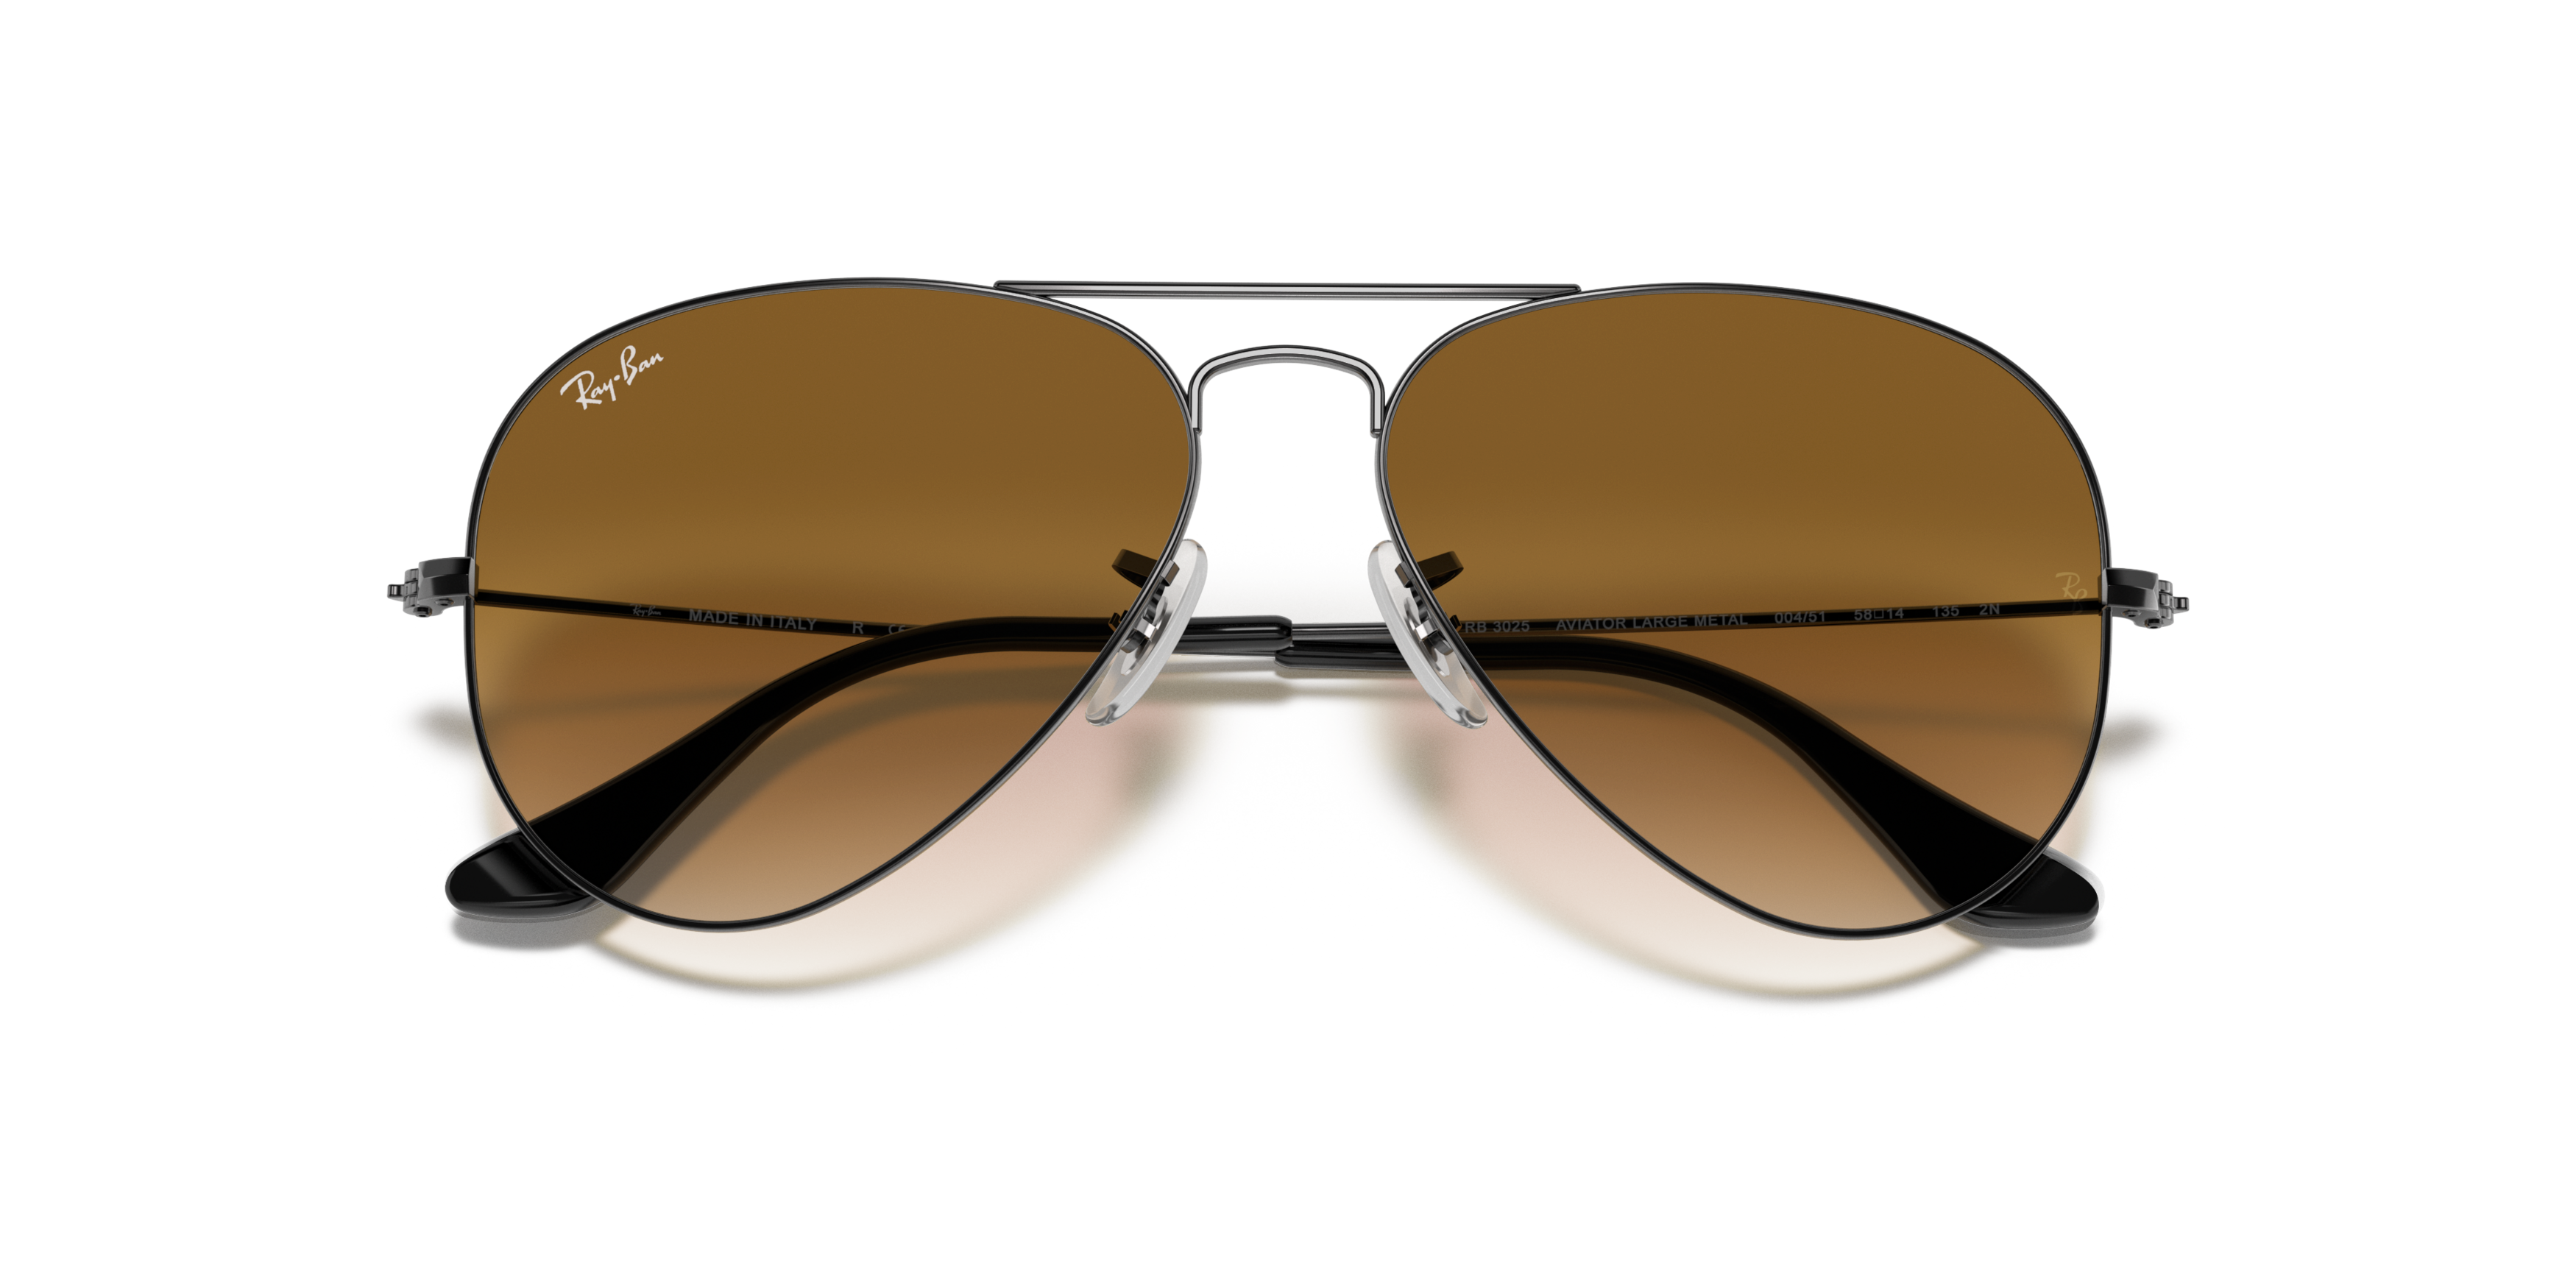 [products.image.folded] Ray-Ban Aviator Gradient RB3025 004/51